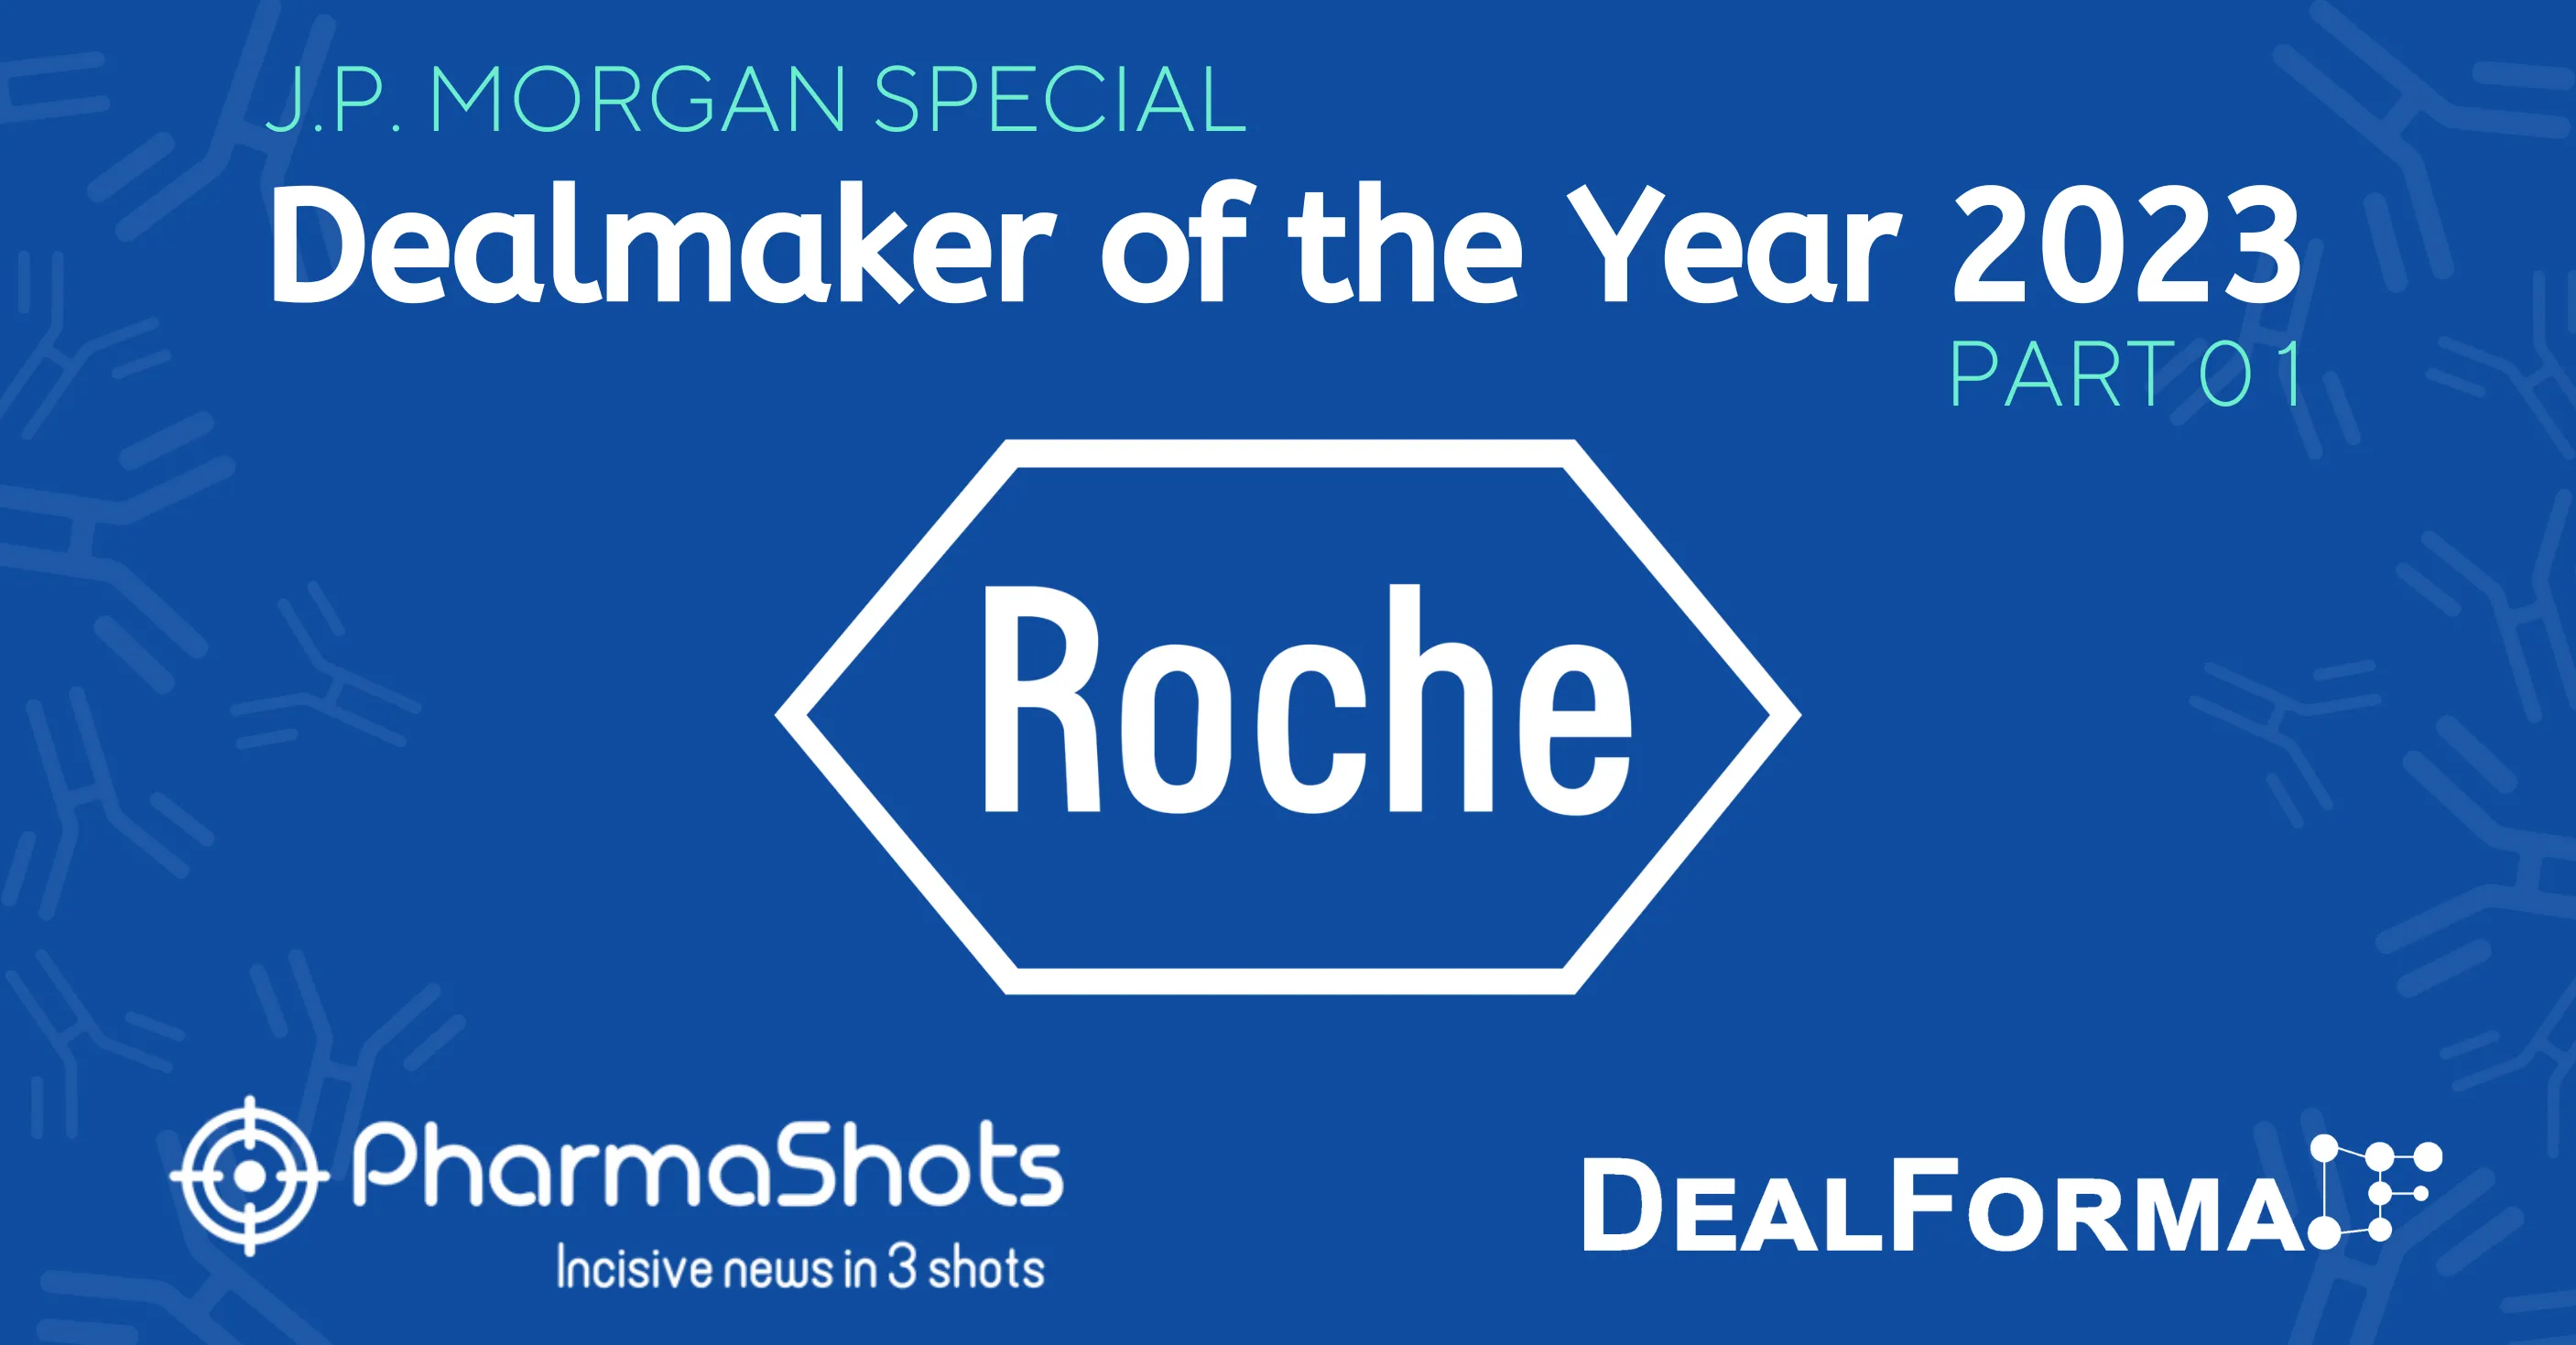 J.P. Morgan Special: Deal Maker of the Year 2023 (Part 01)